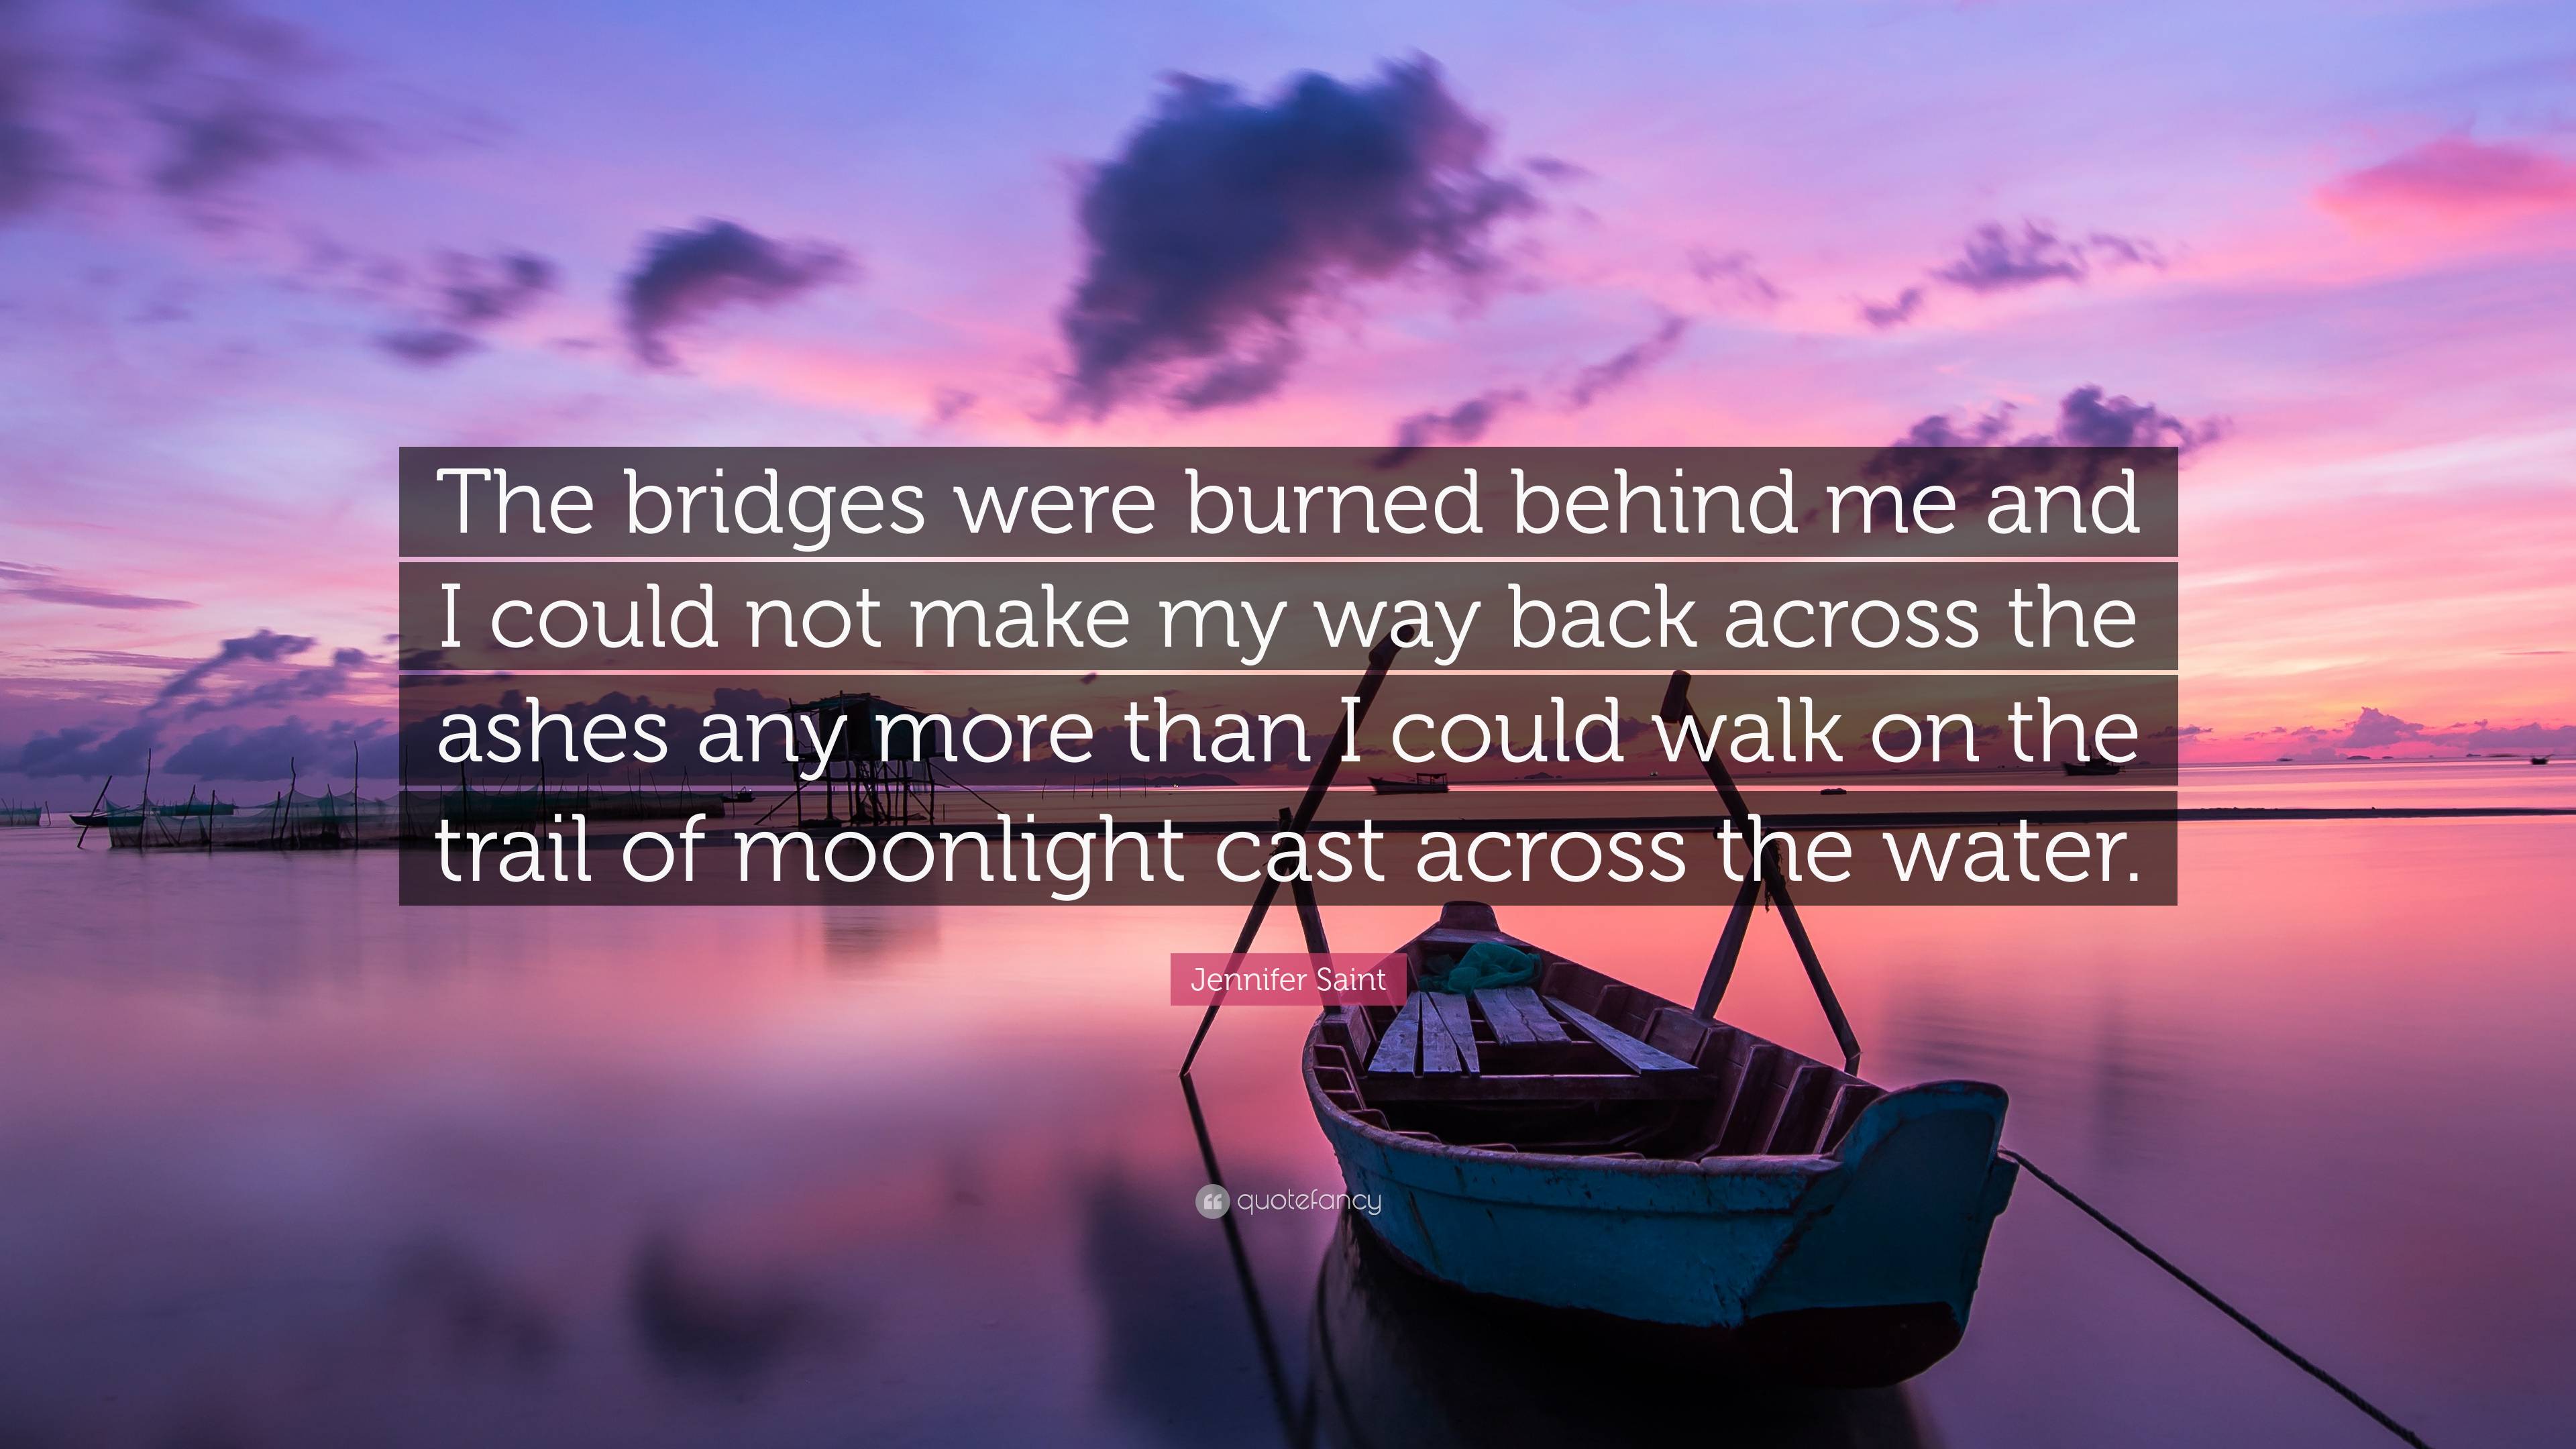 Jennifer Saint Quote: “The bridges were burned behind me and I could ...